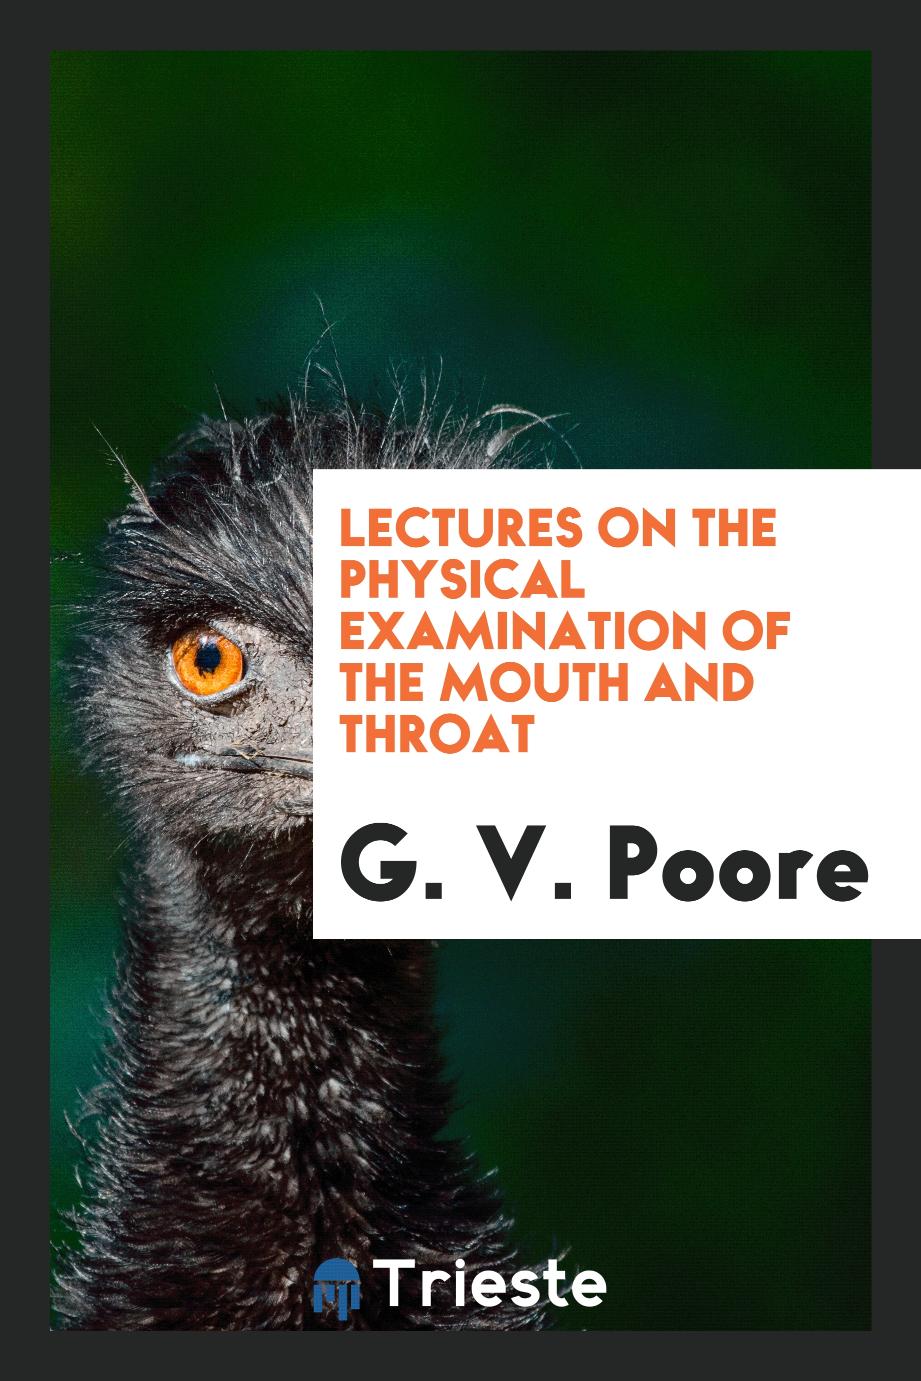 Lectures on the physical examination of the mouth and throat